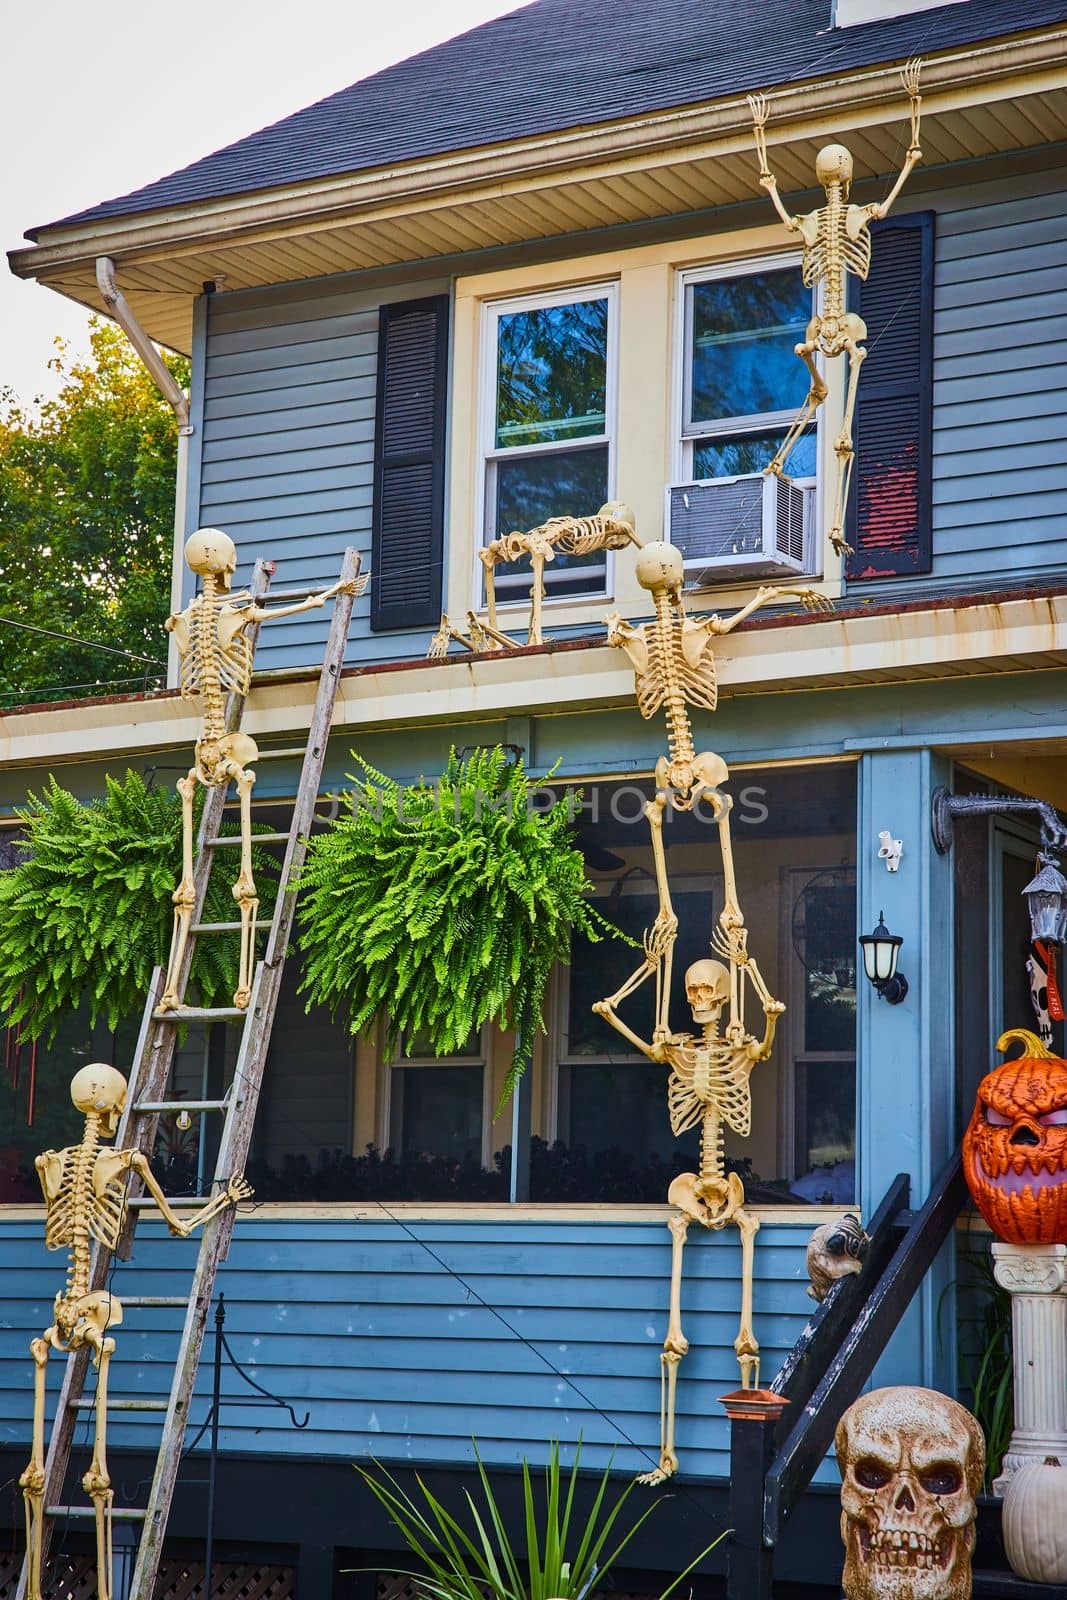 Image of Halloween decorations on exterior of home with skeletons climbing up to roof